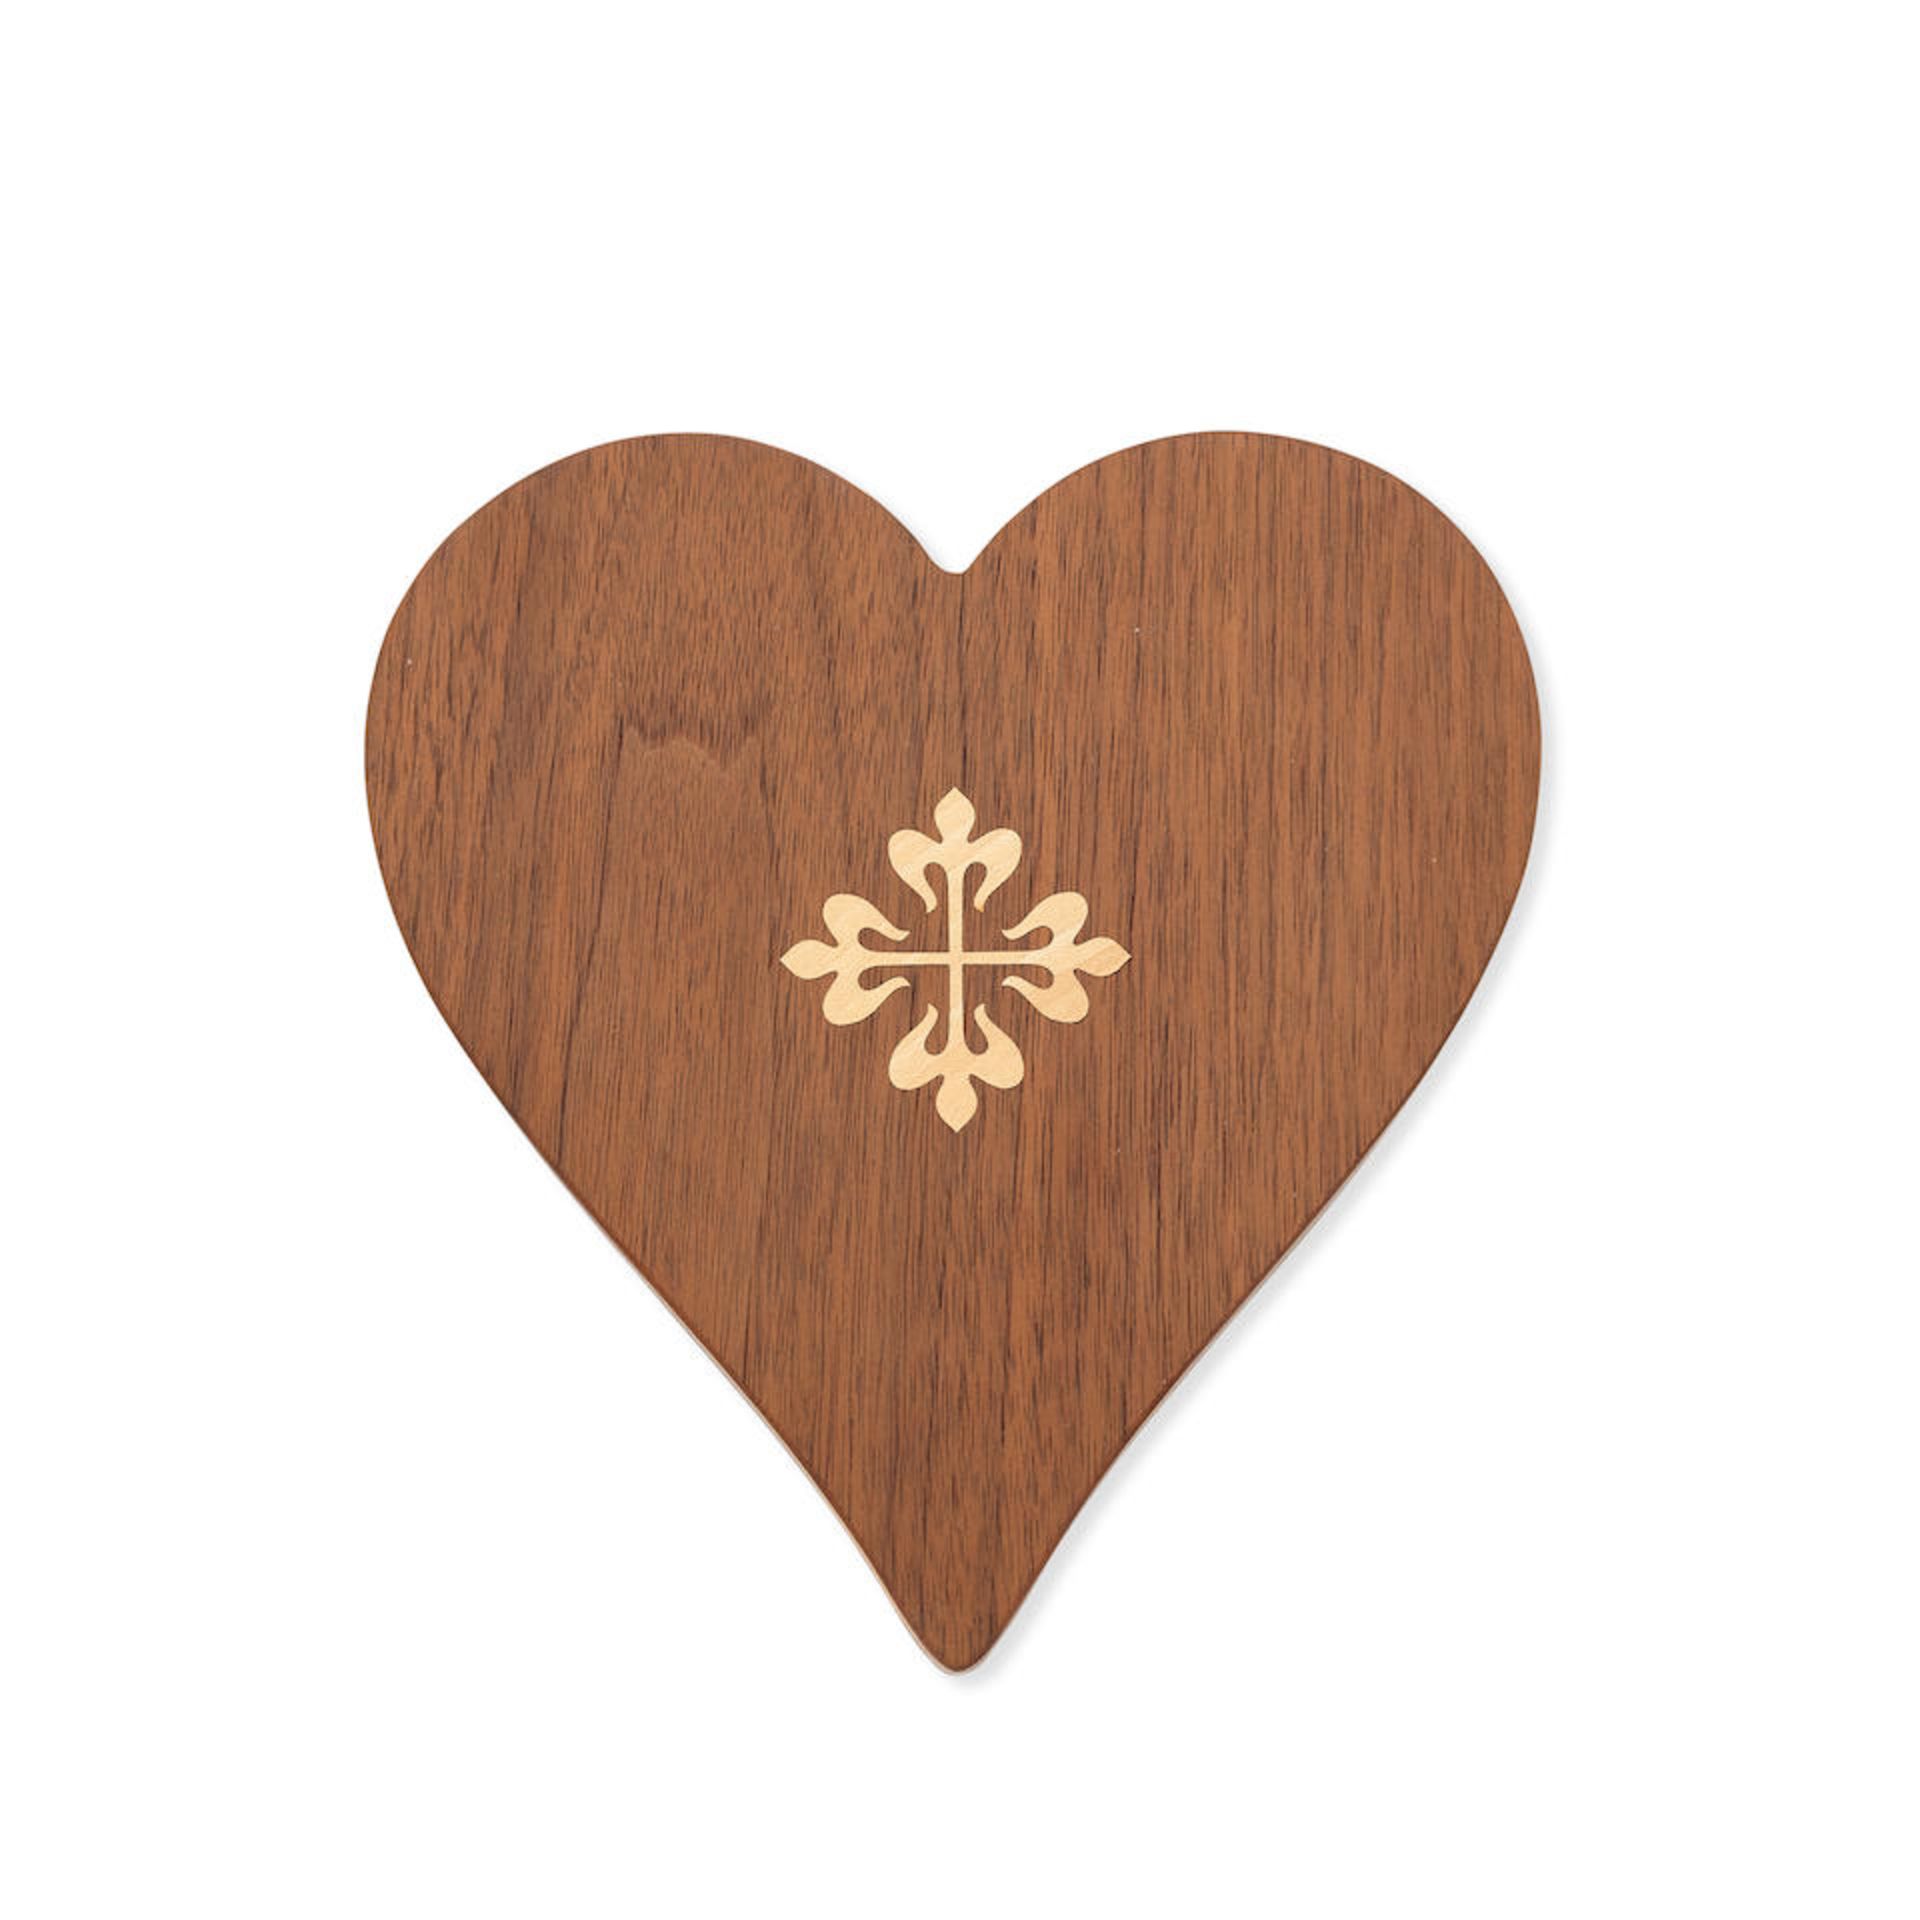 Patek Philippe. A wooden heart shaped chocolate box Circa 2010 - Image 2 of 5